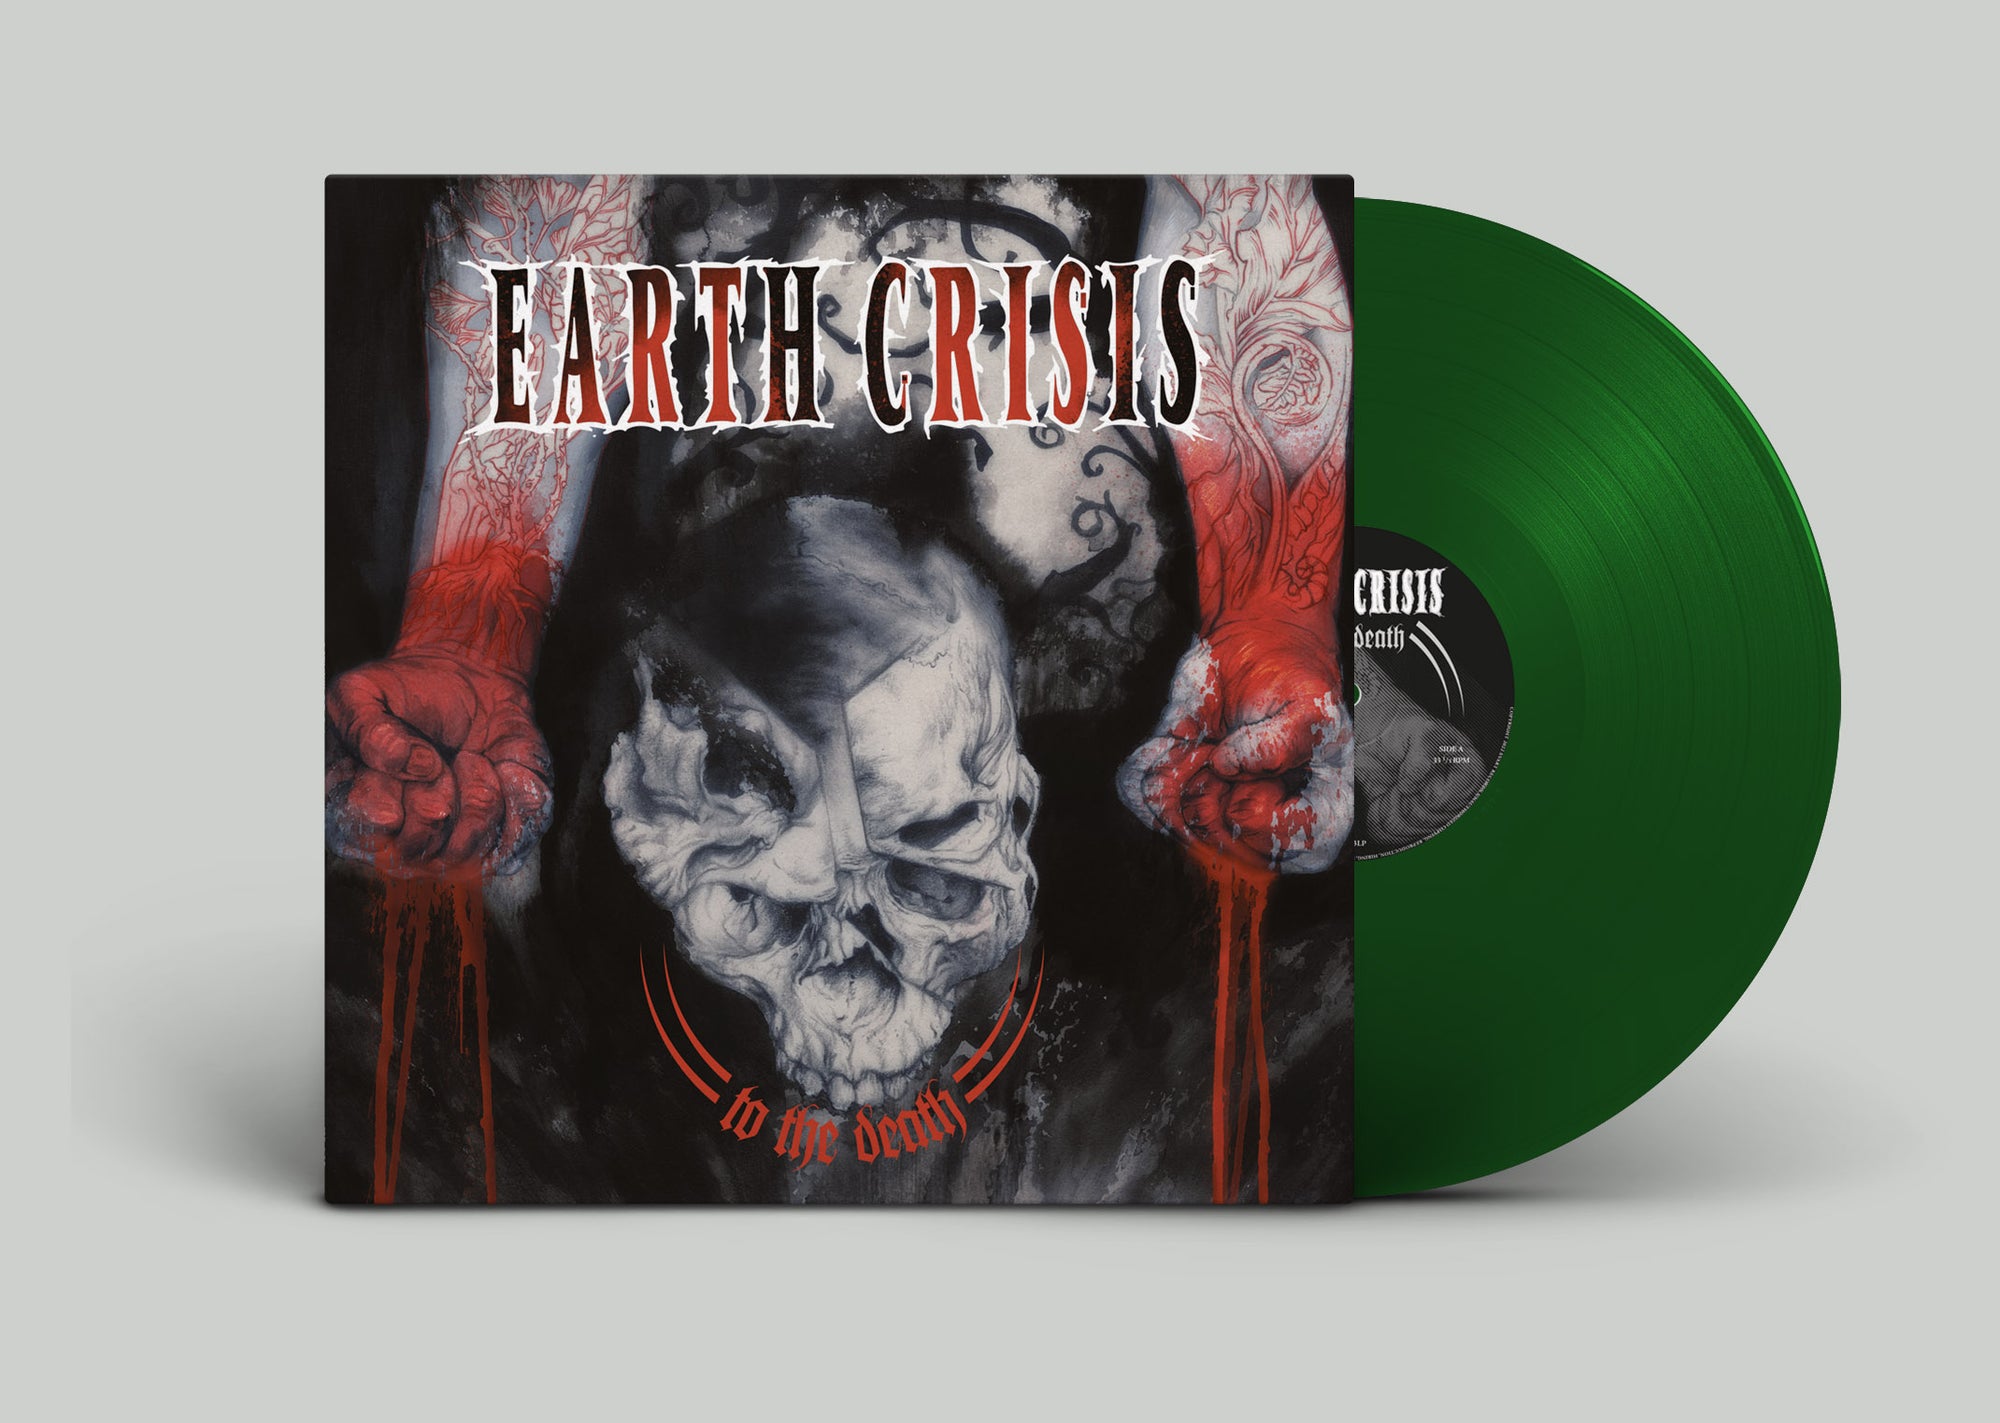 EARTH CRISIS "TO THE DEATH" VINYL RECORD